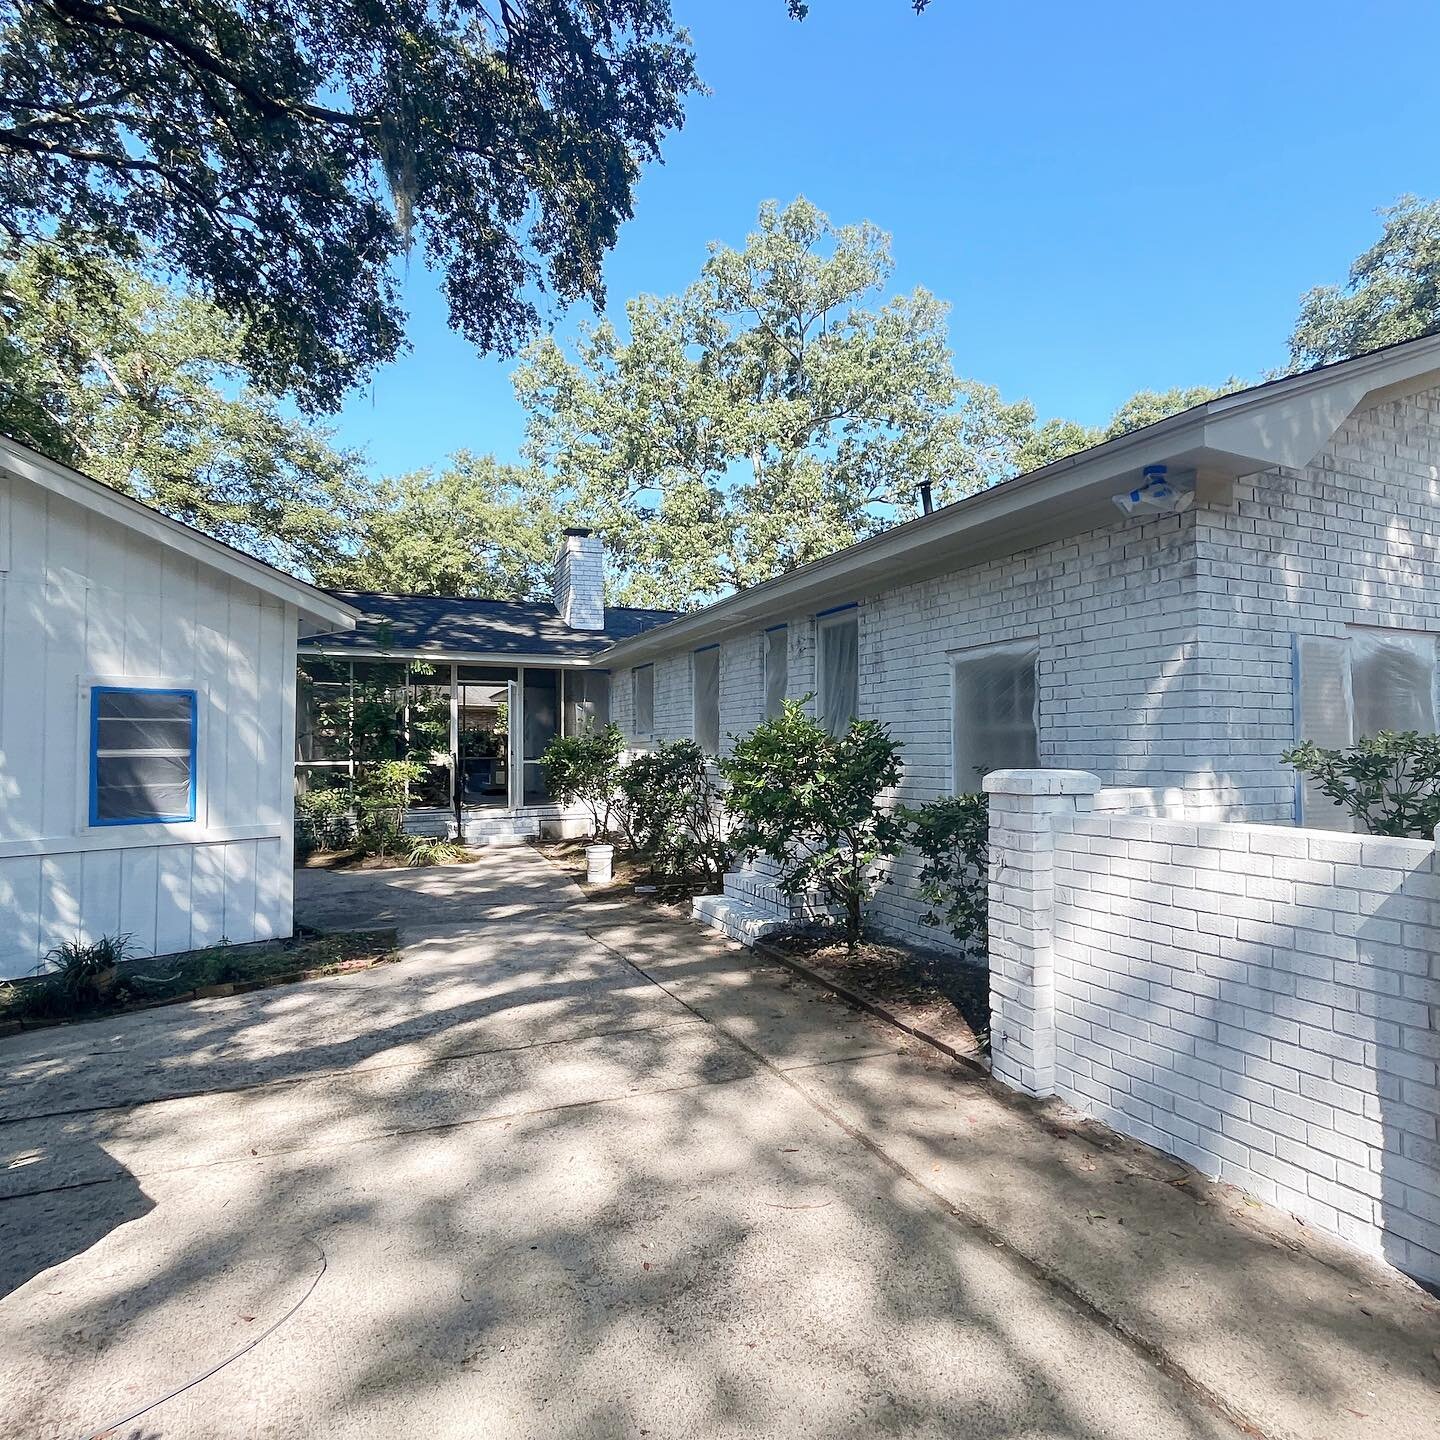 Rehab of our most recent acquisition is well underway! This single story brick ranch home sits on a large corner lot just two blocks from the #ashleyriver with easy access to 26 and 61. It&rsquo;s going to be a beauty!
@polishpopdesign 

#charleston
